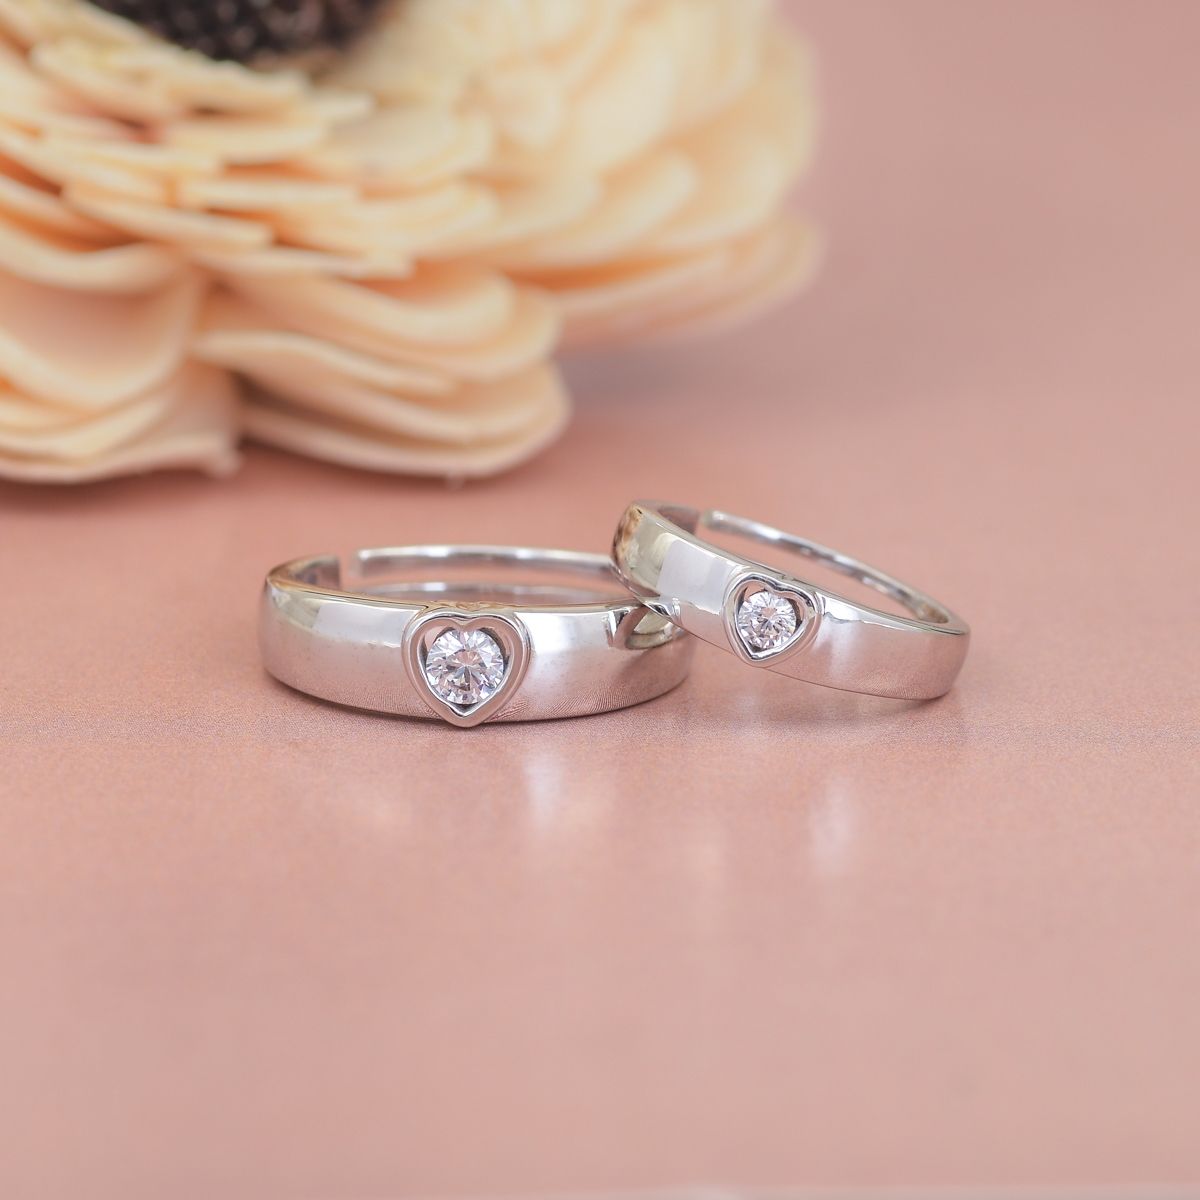 Silver Couple Rings Silver Ring For Couples on Anniversary – Zevrr